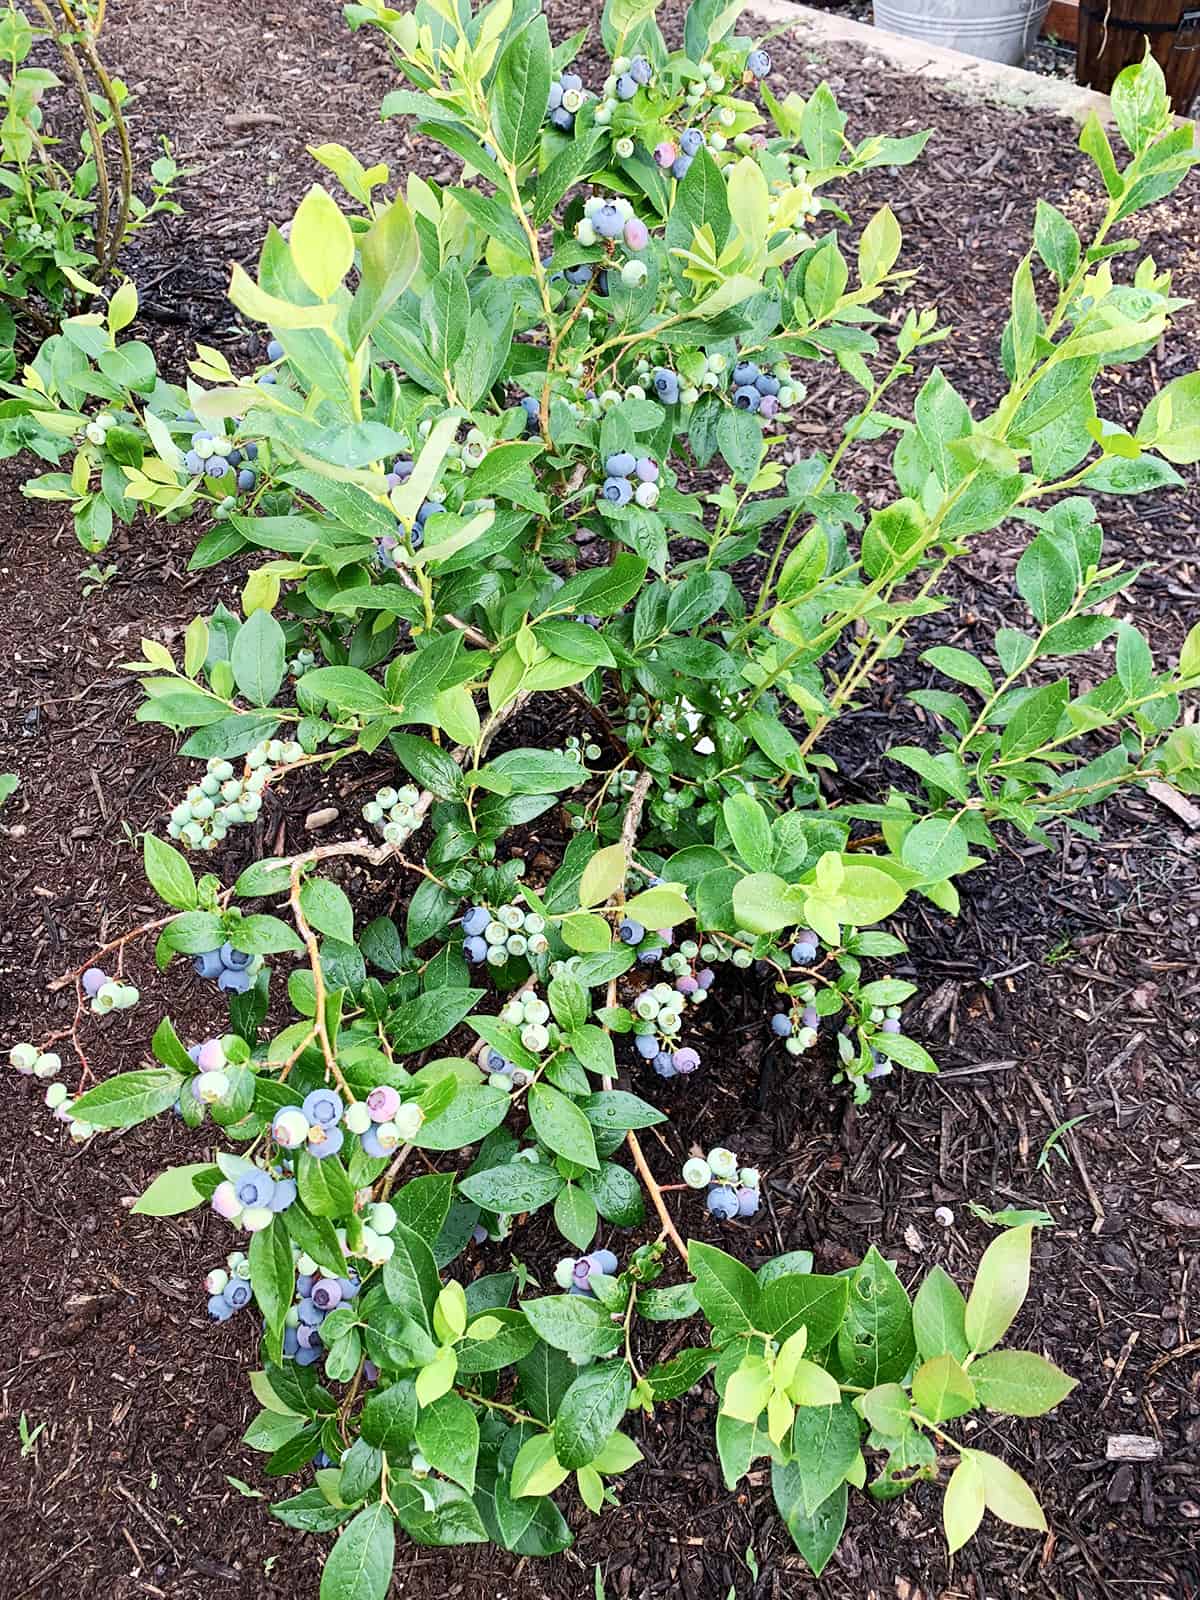 Blueberry plants with fresh berries